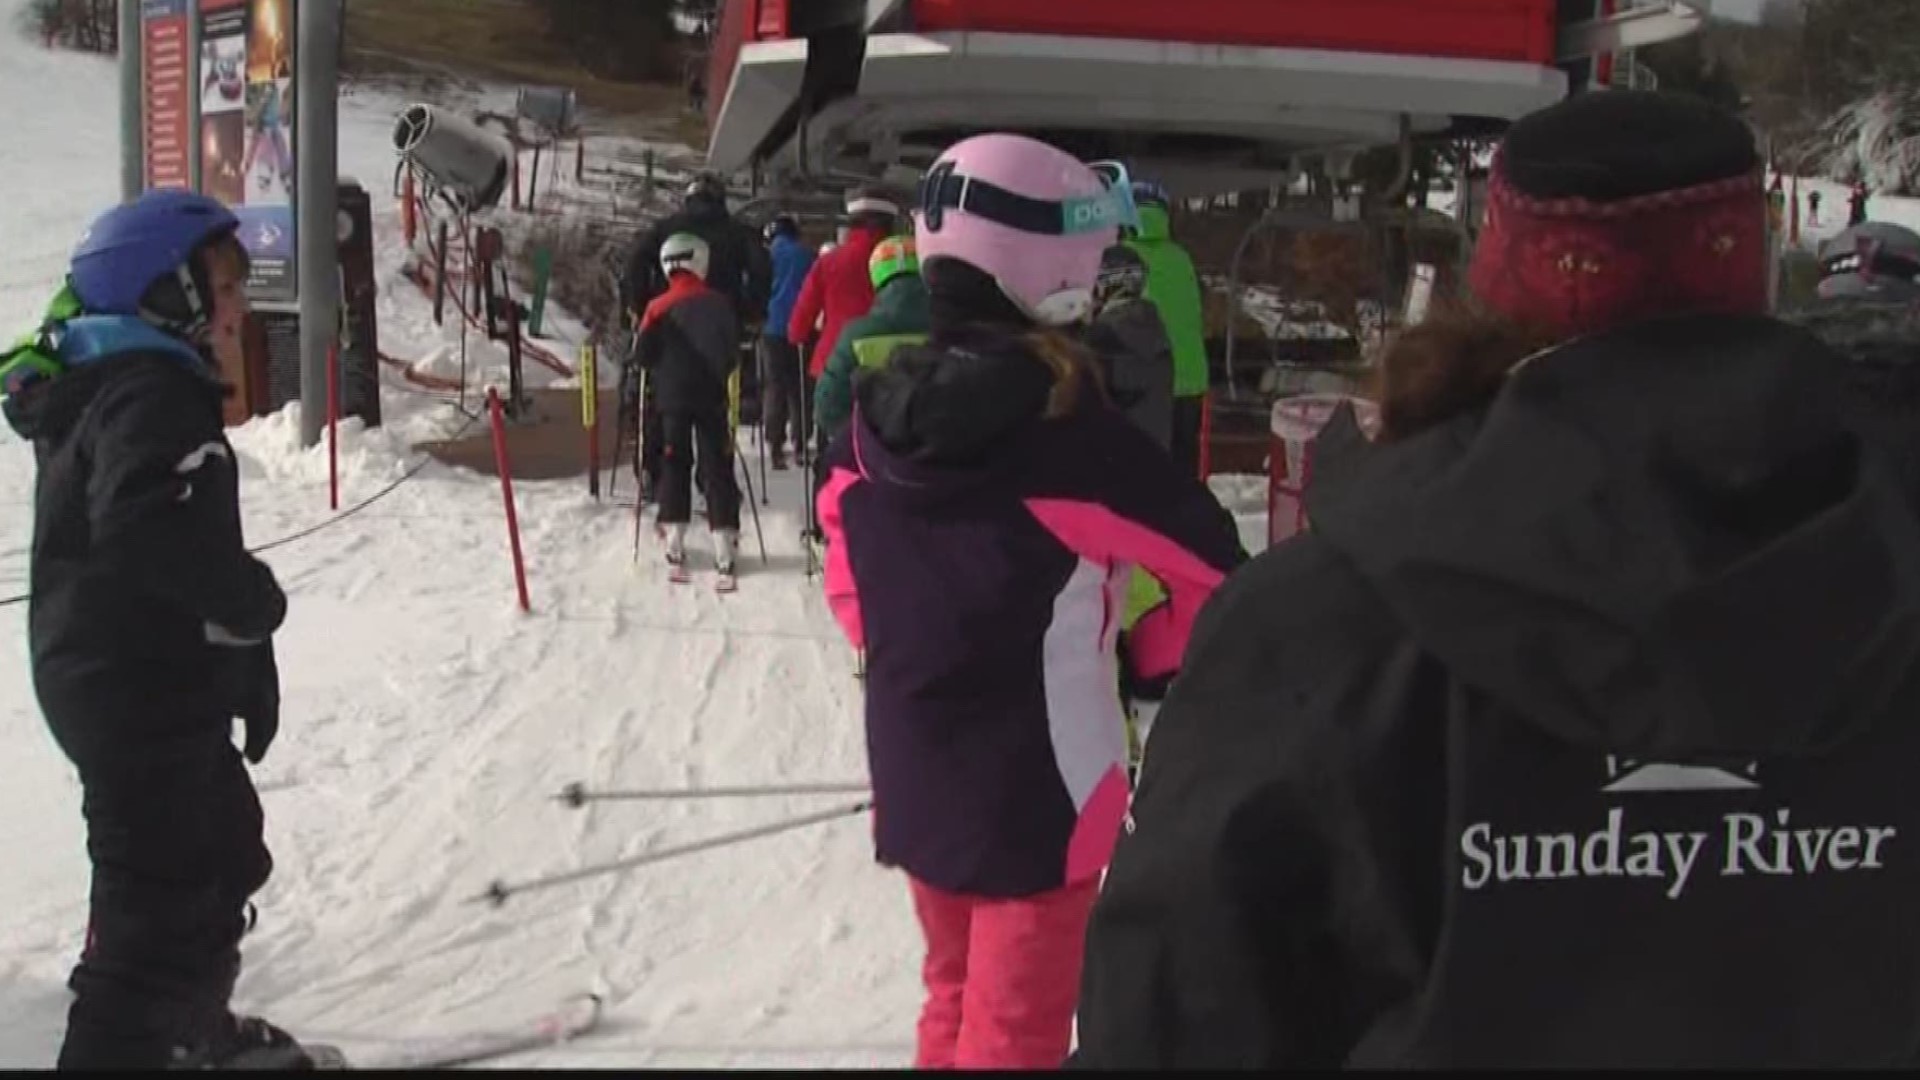 Looking for workforce at Sunday River